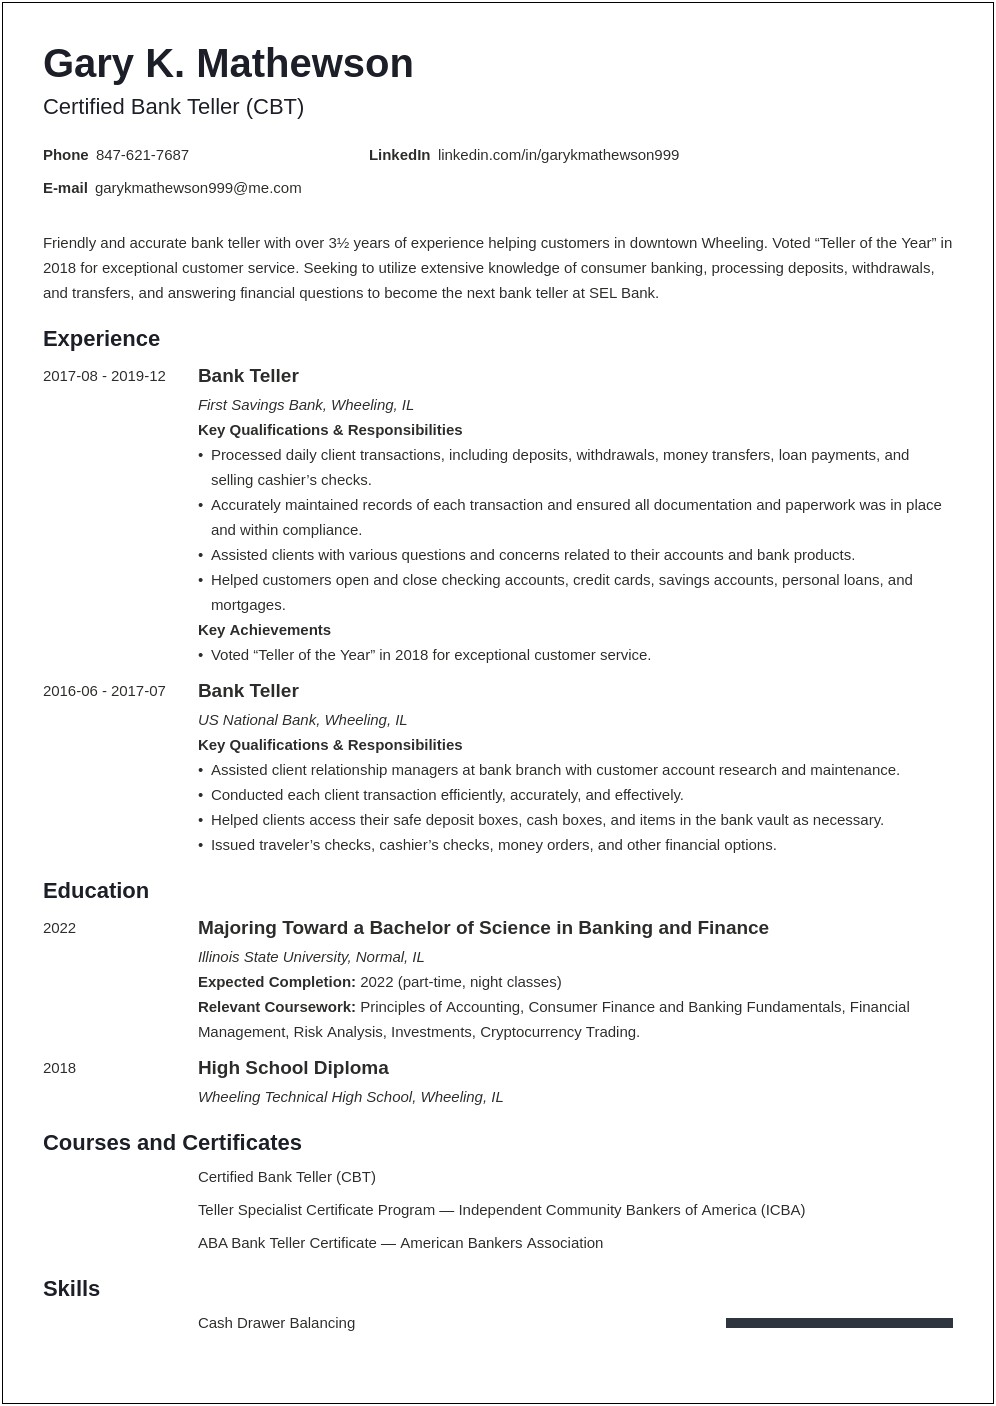 Resume For Bank Teller Job With No Experience